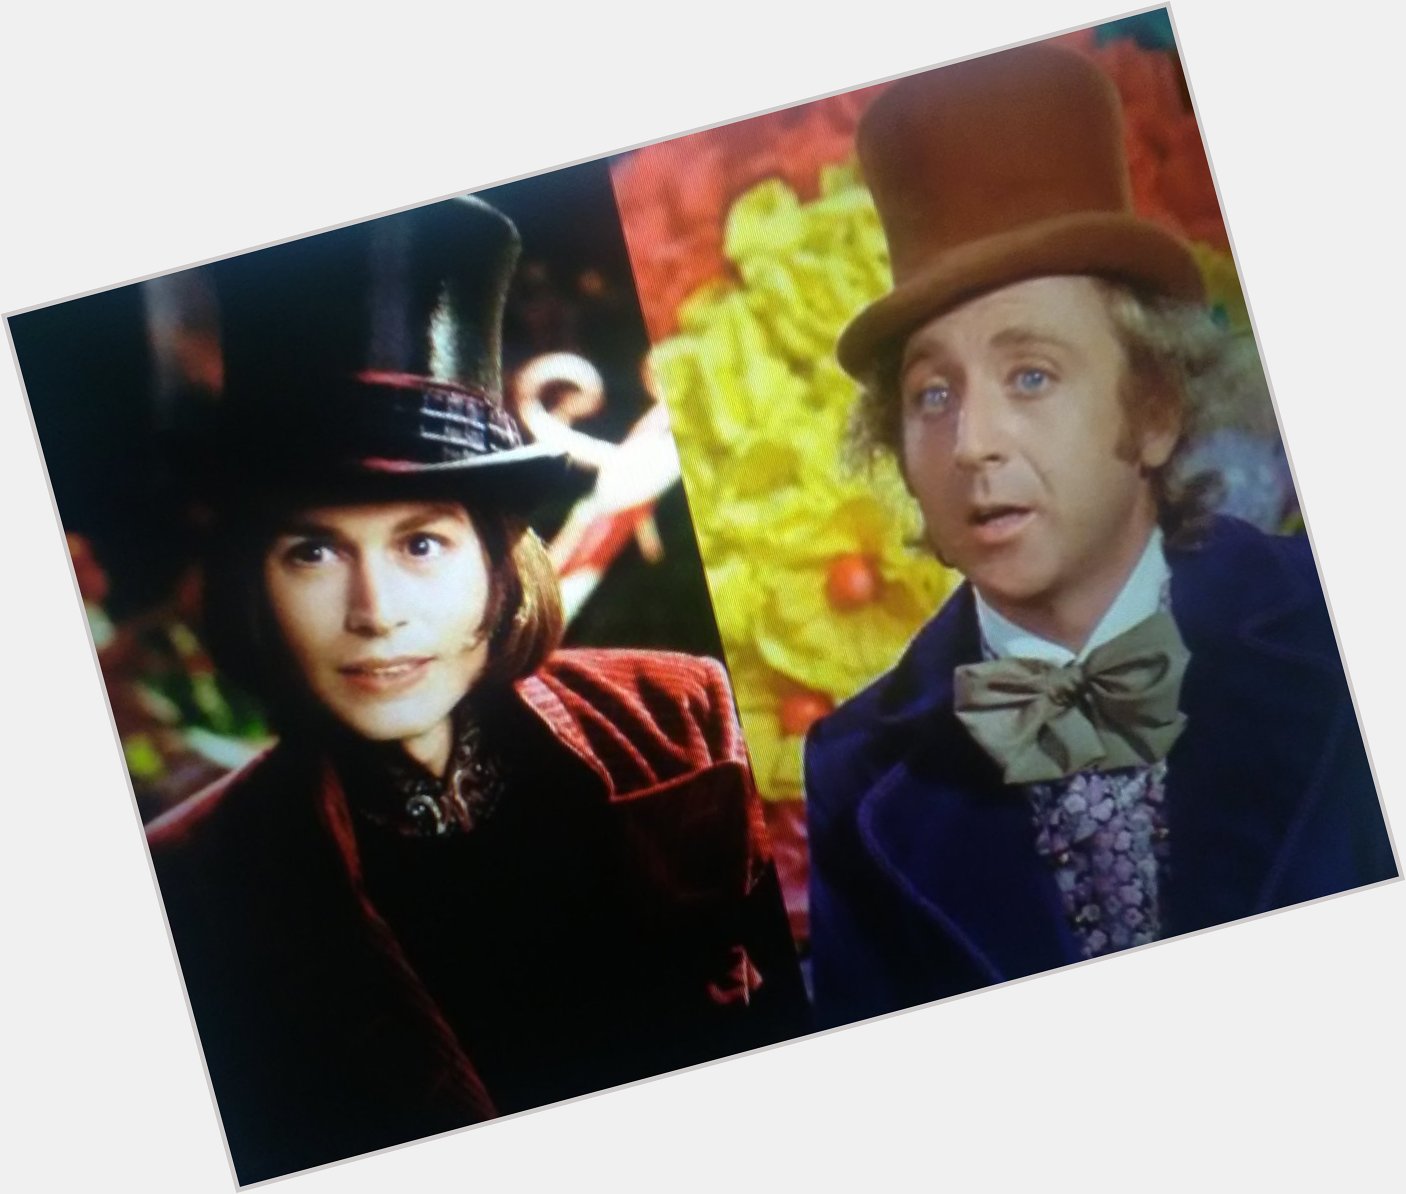 Happy belated birthday to Johnny Depp and Happy birthday to the late Gene Wilder   